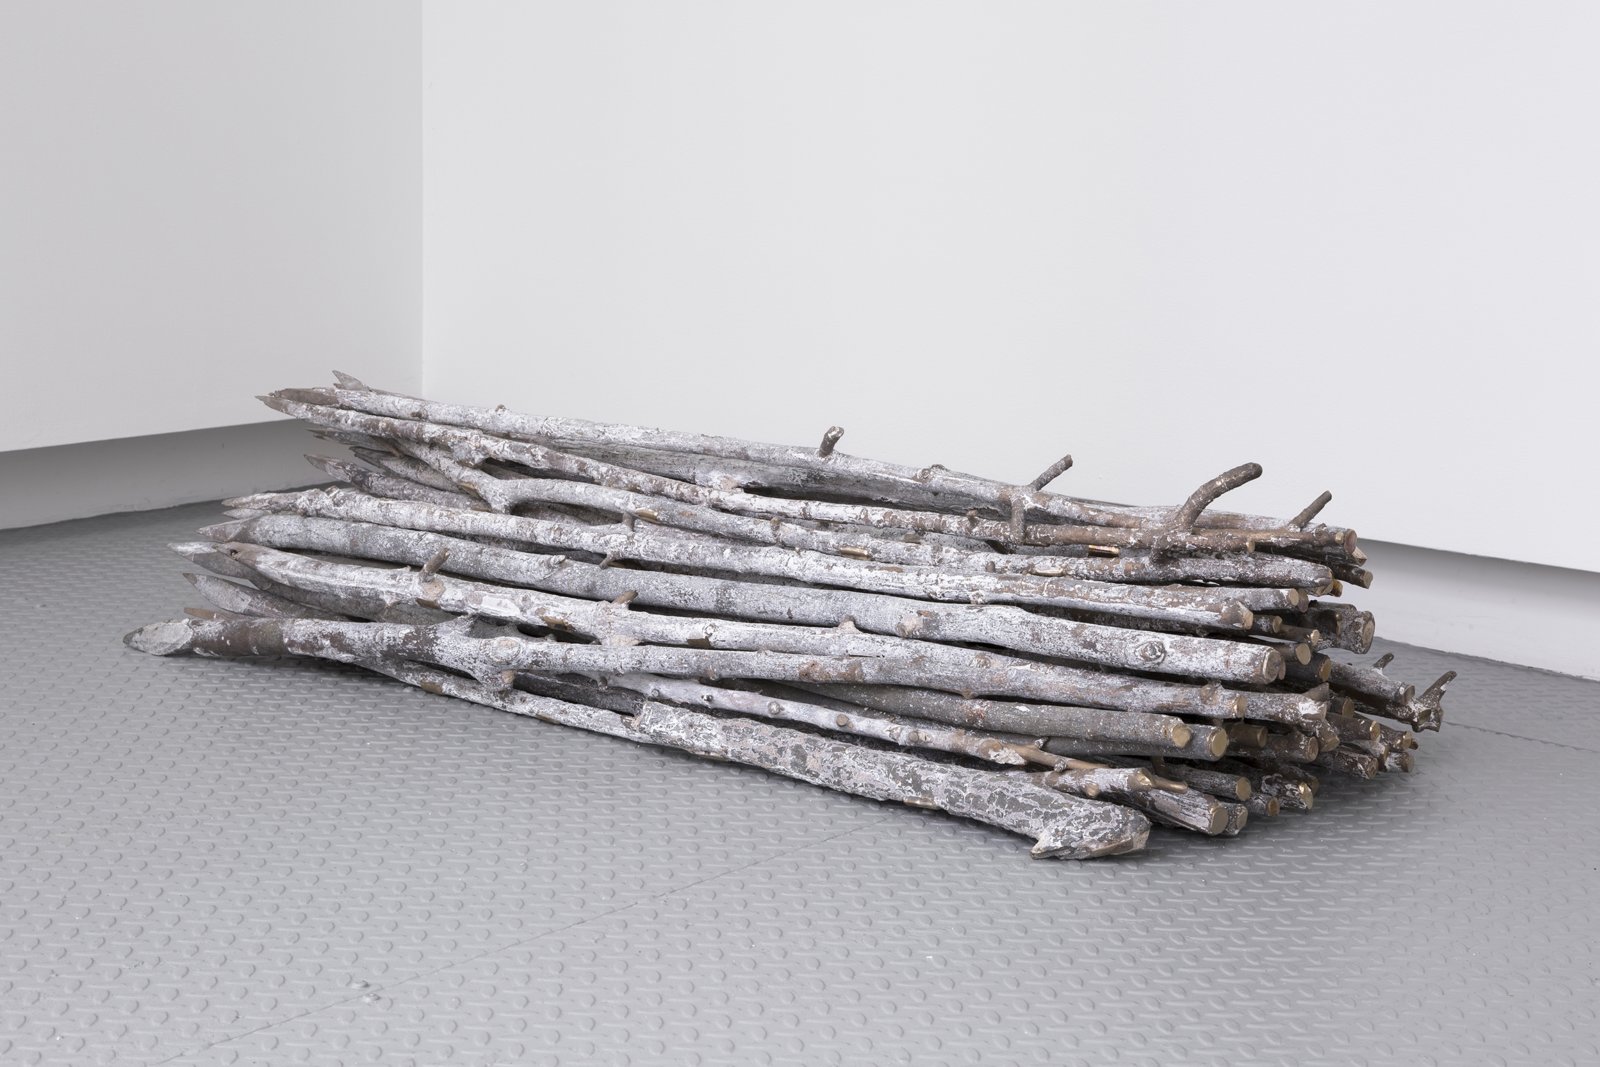 Abbas Akhavan, Study for a Garden, 2017, bronze, 35 unique pieces, each 47 x 2 x 2 in. (120 x 5 x 5 cm). Installation view, A Kiss Under the Tail, Arsenal Contemporary, New York, USA, 2018